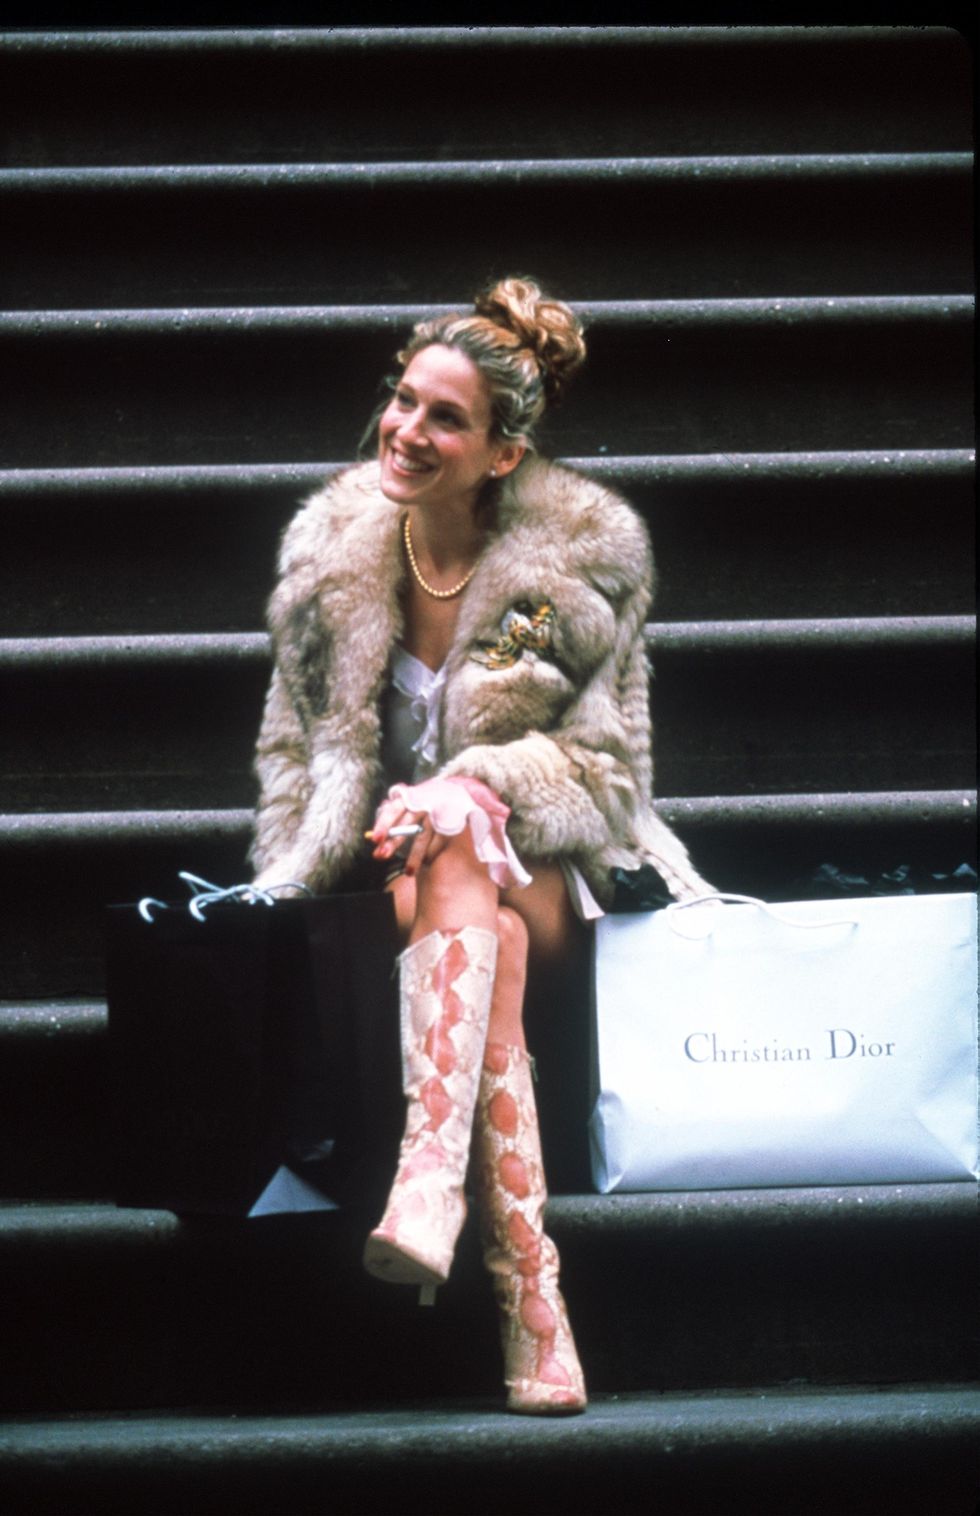 Carrie Bradshaw's 15 Best 'Sex And The City' Outfits